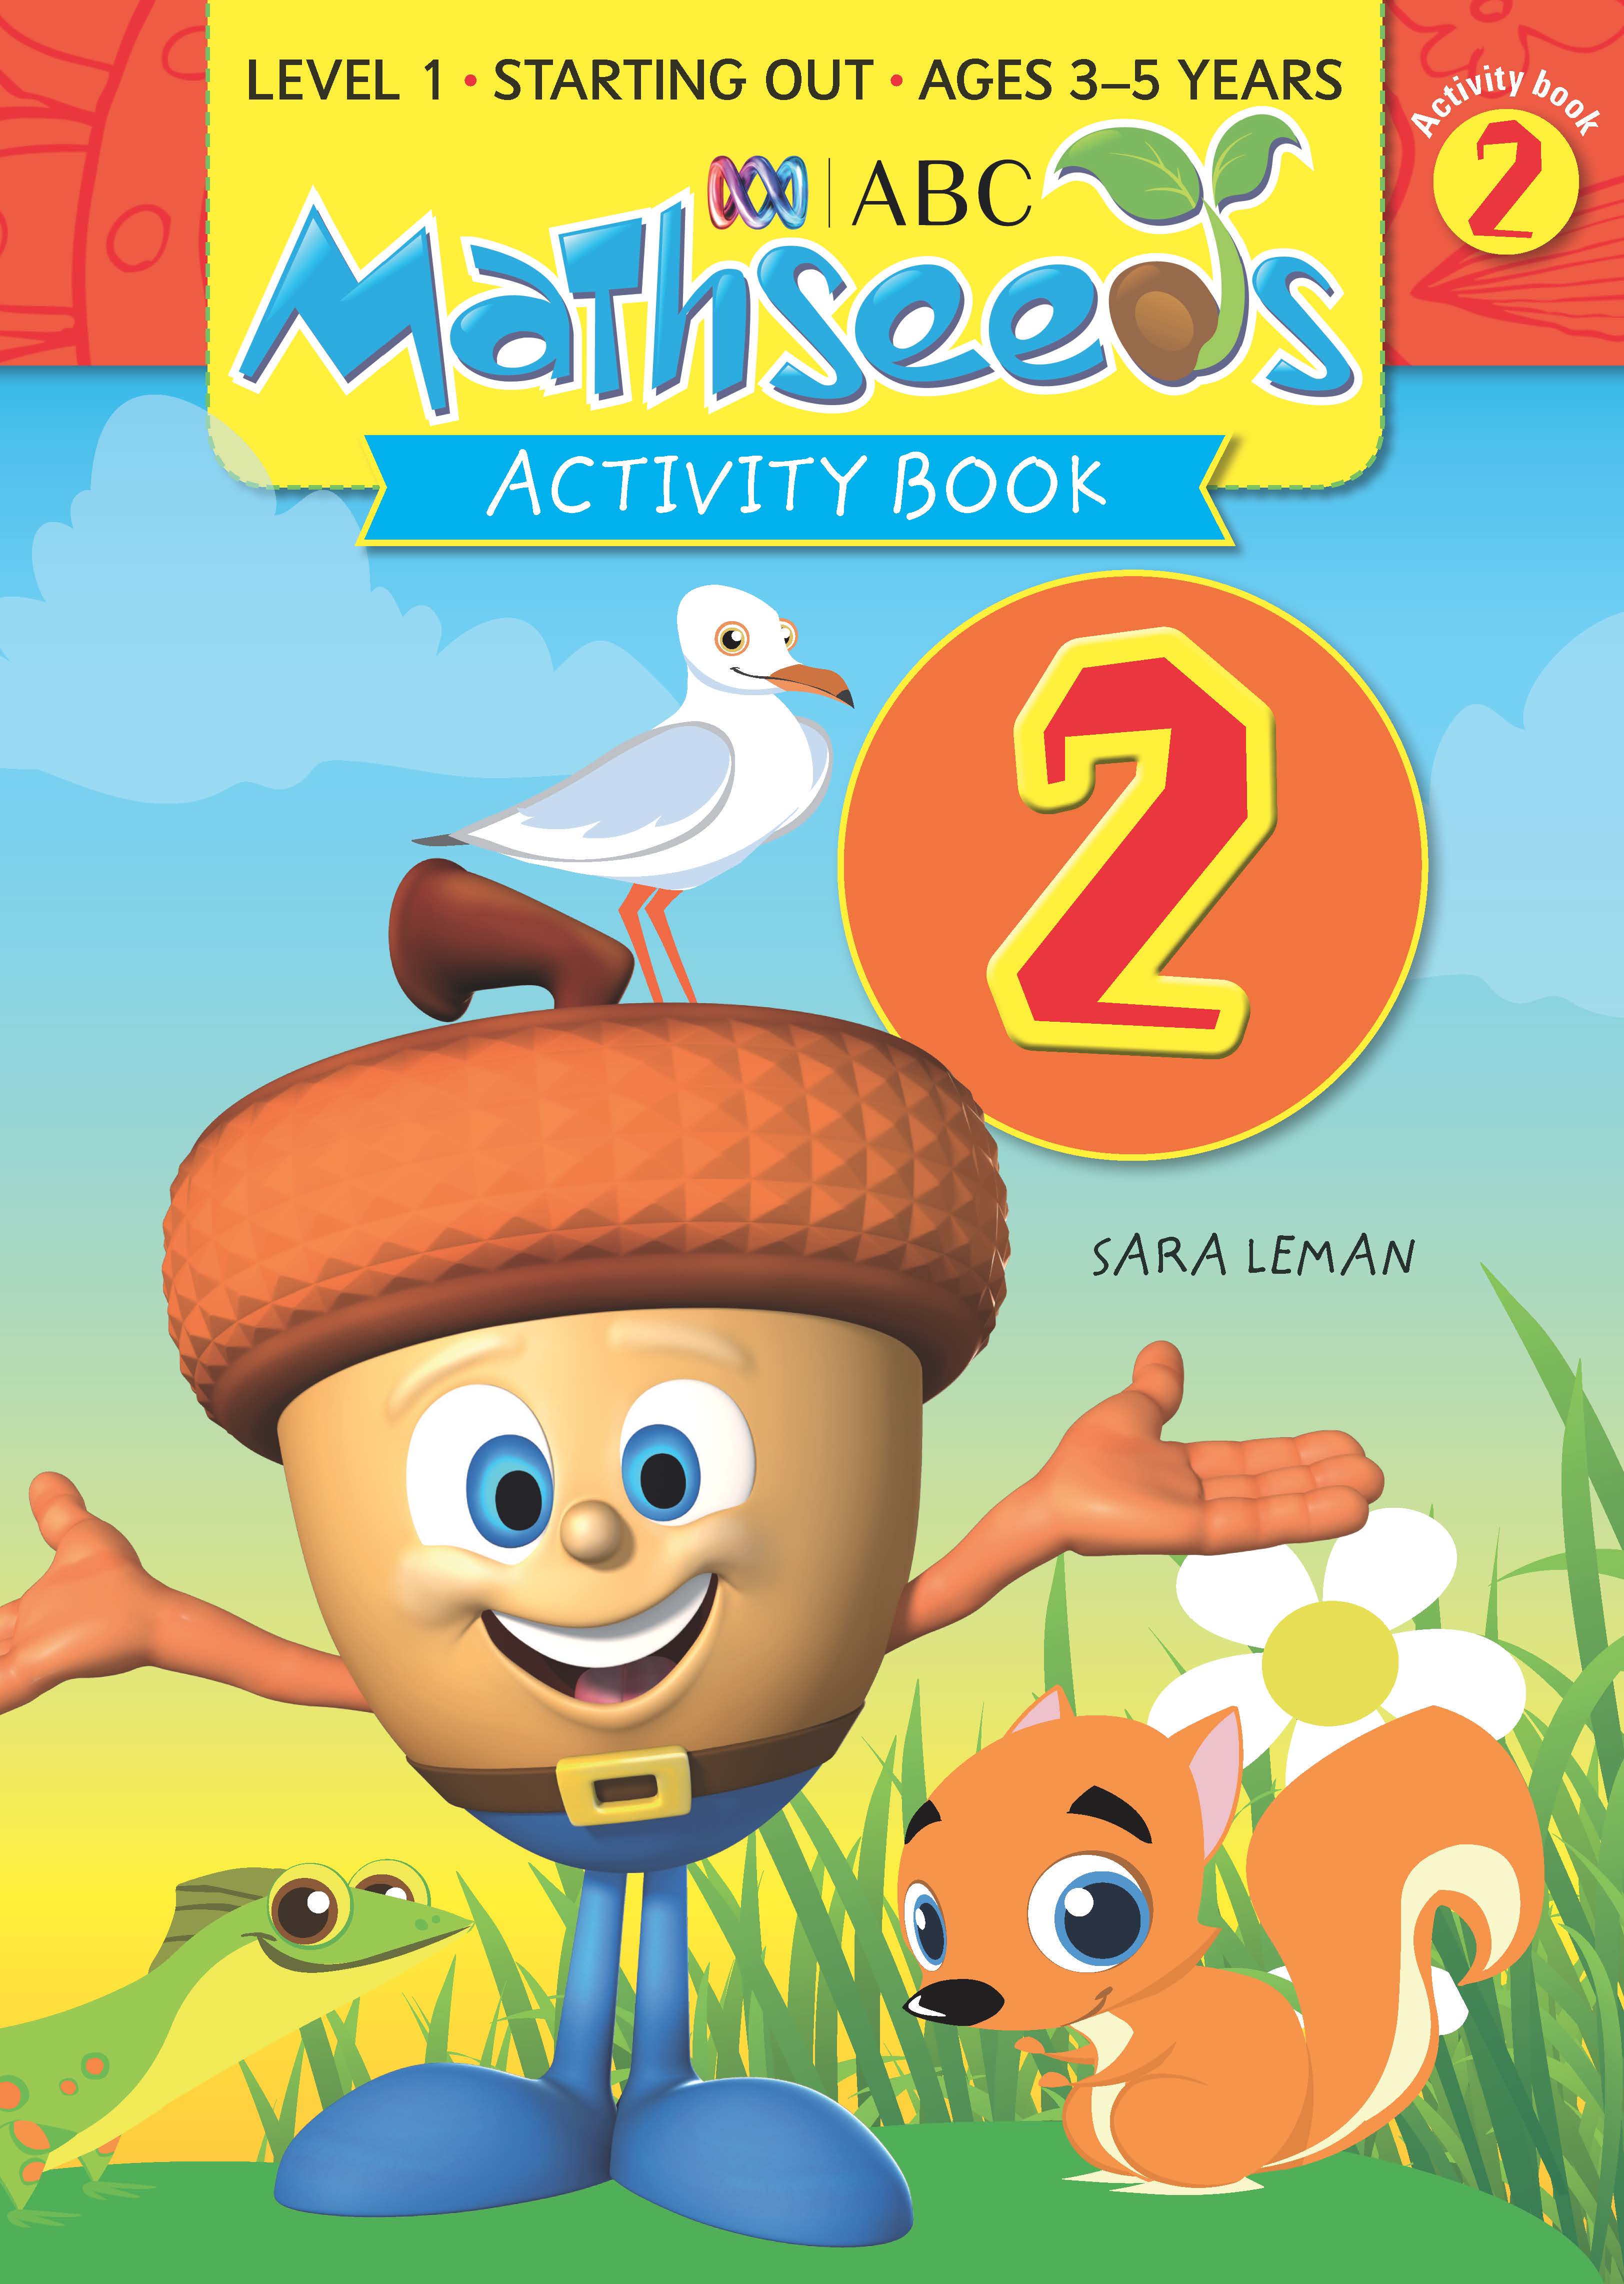 Picture of ABC Mathseeds Activity Book 2 Level 1 Ages 3-5